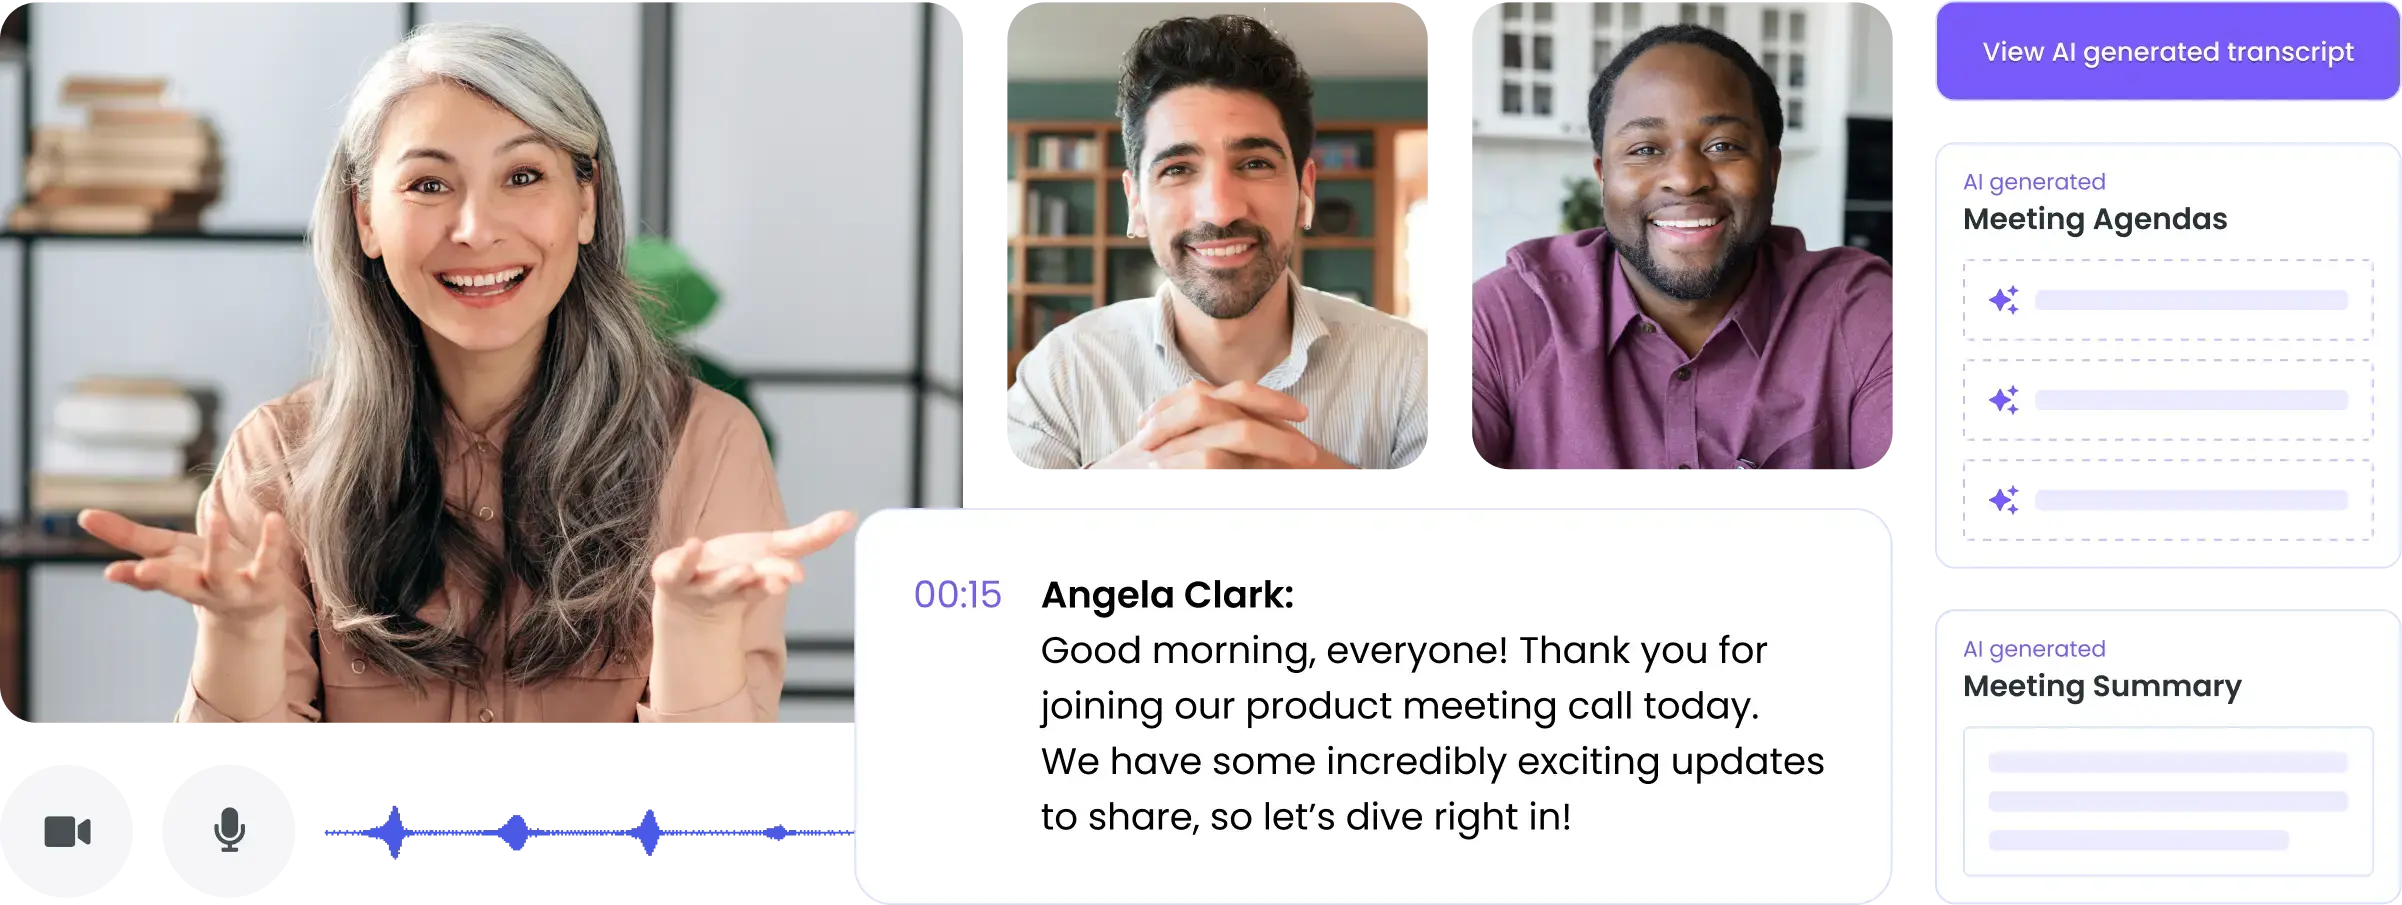 Remote workers reading meeting transcription and summary generated by Fellow AI meeting assistant